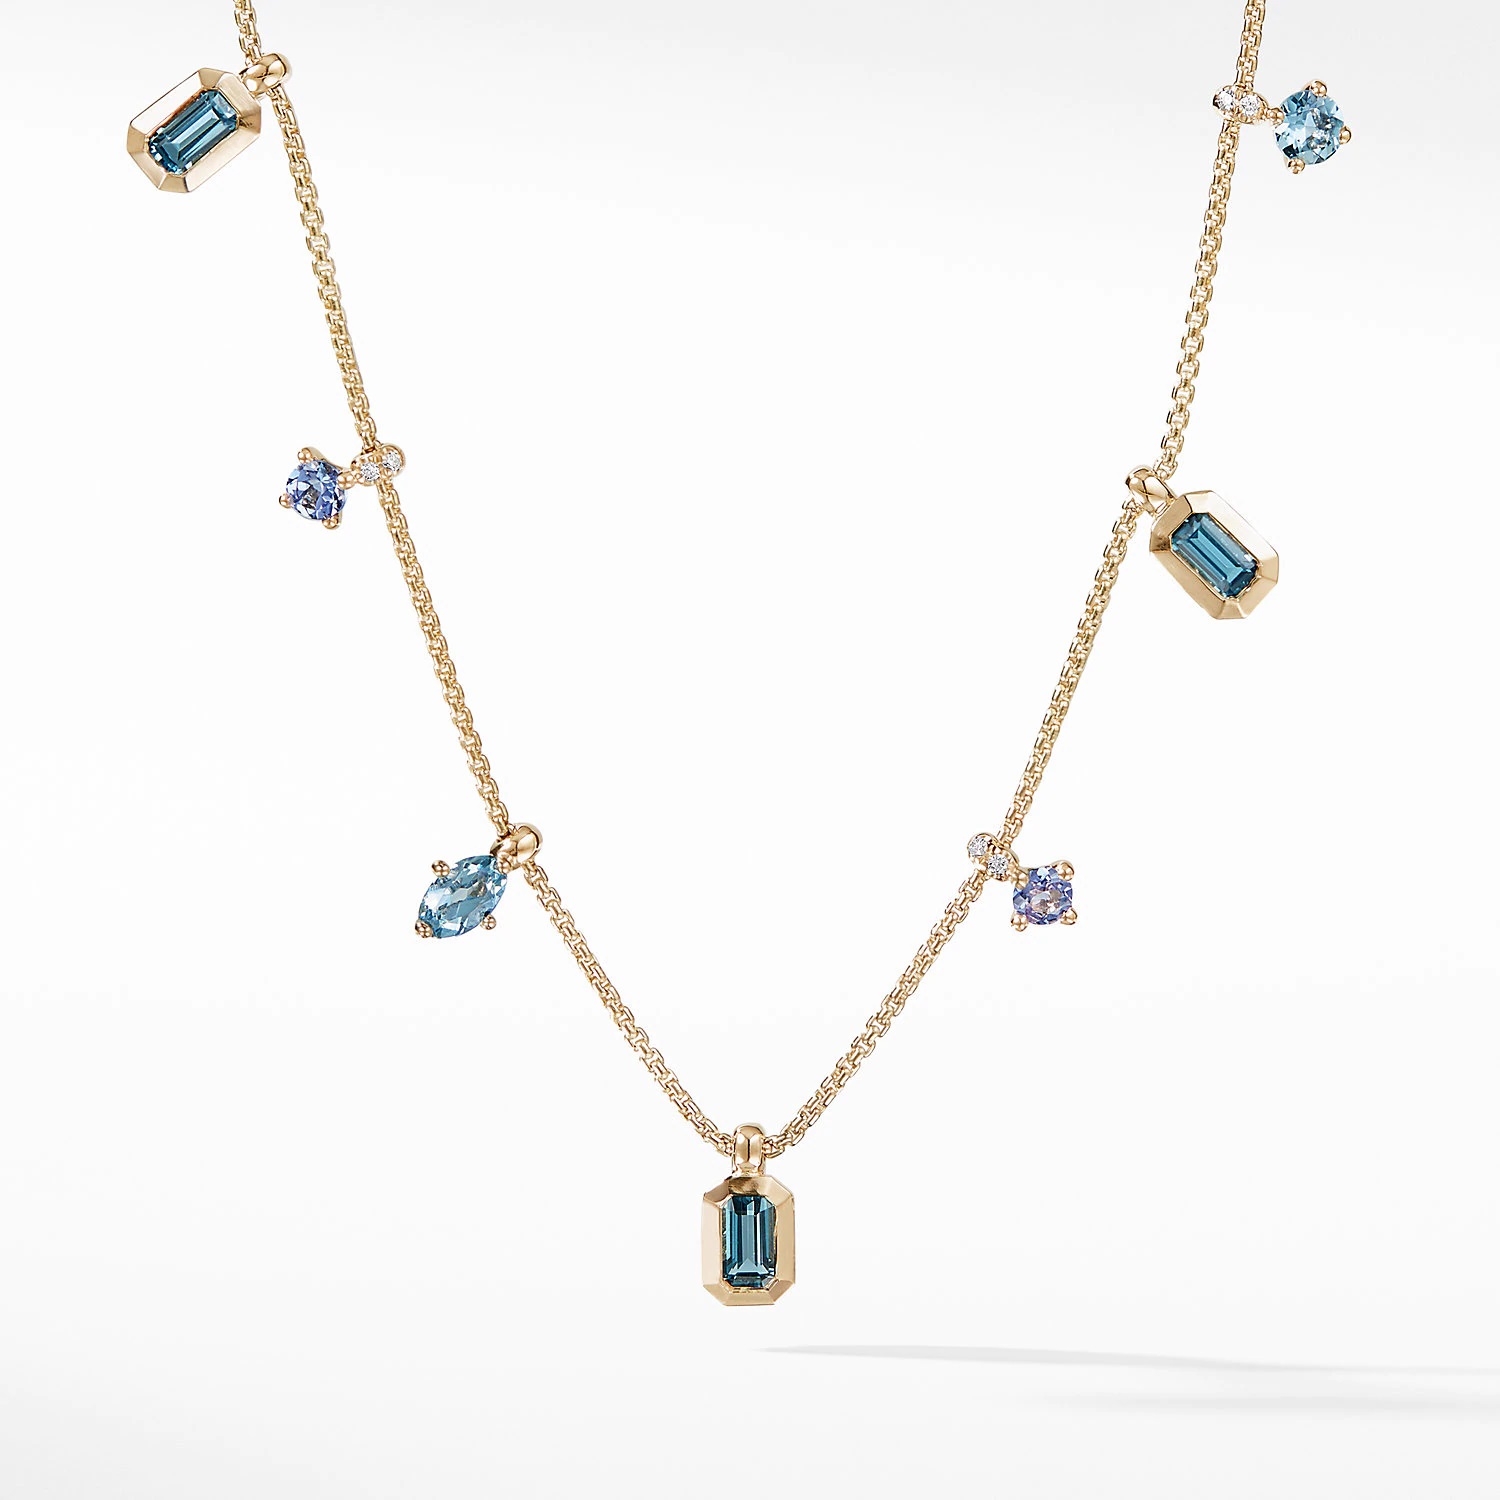 Tiffany T diamond and mother-of-pearl station necklace in 18k rose gold. |  Tiffany & Co.